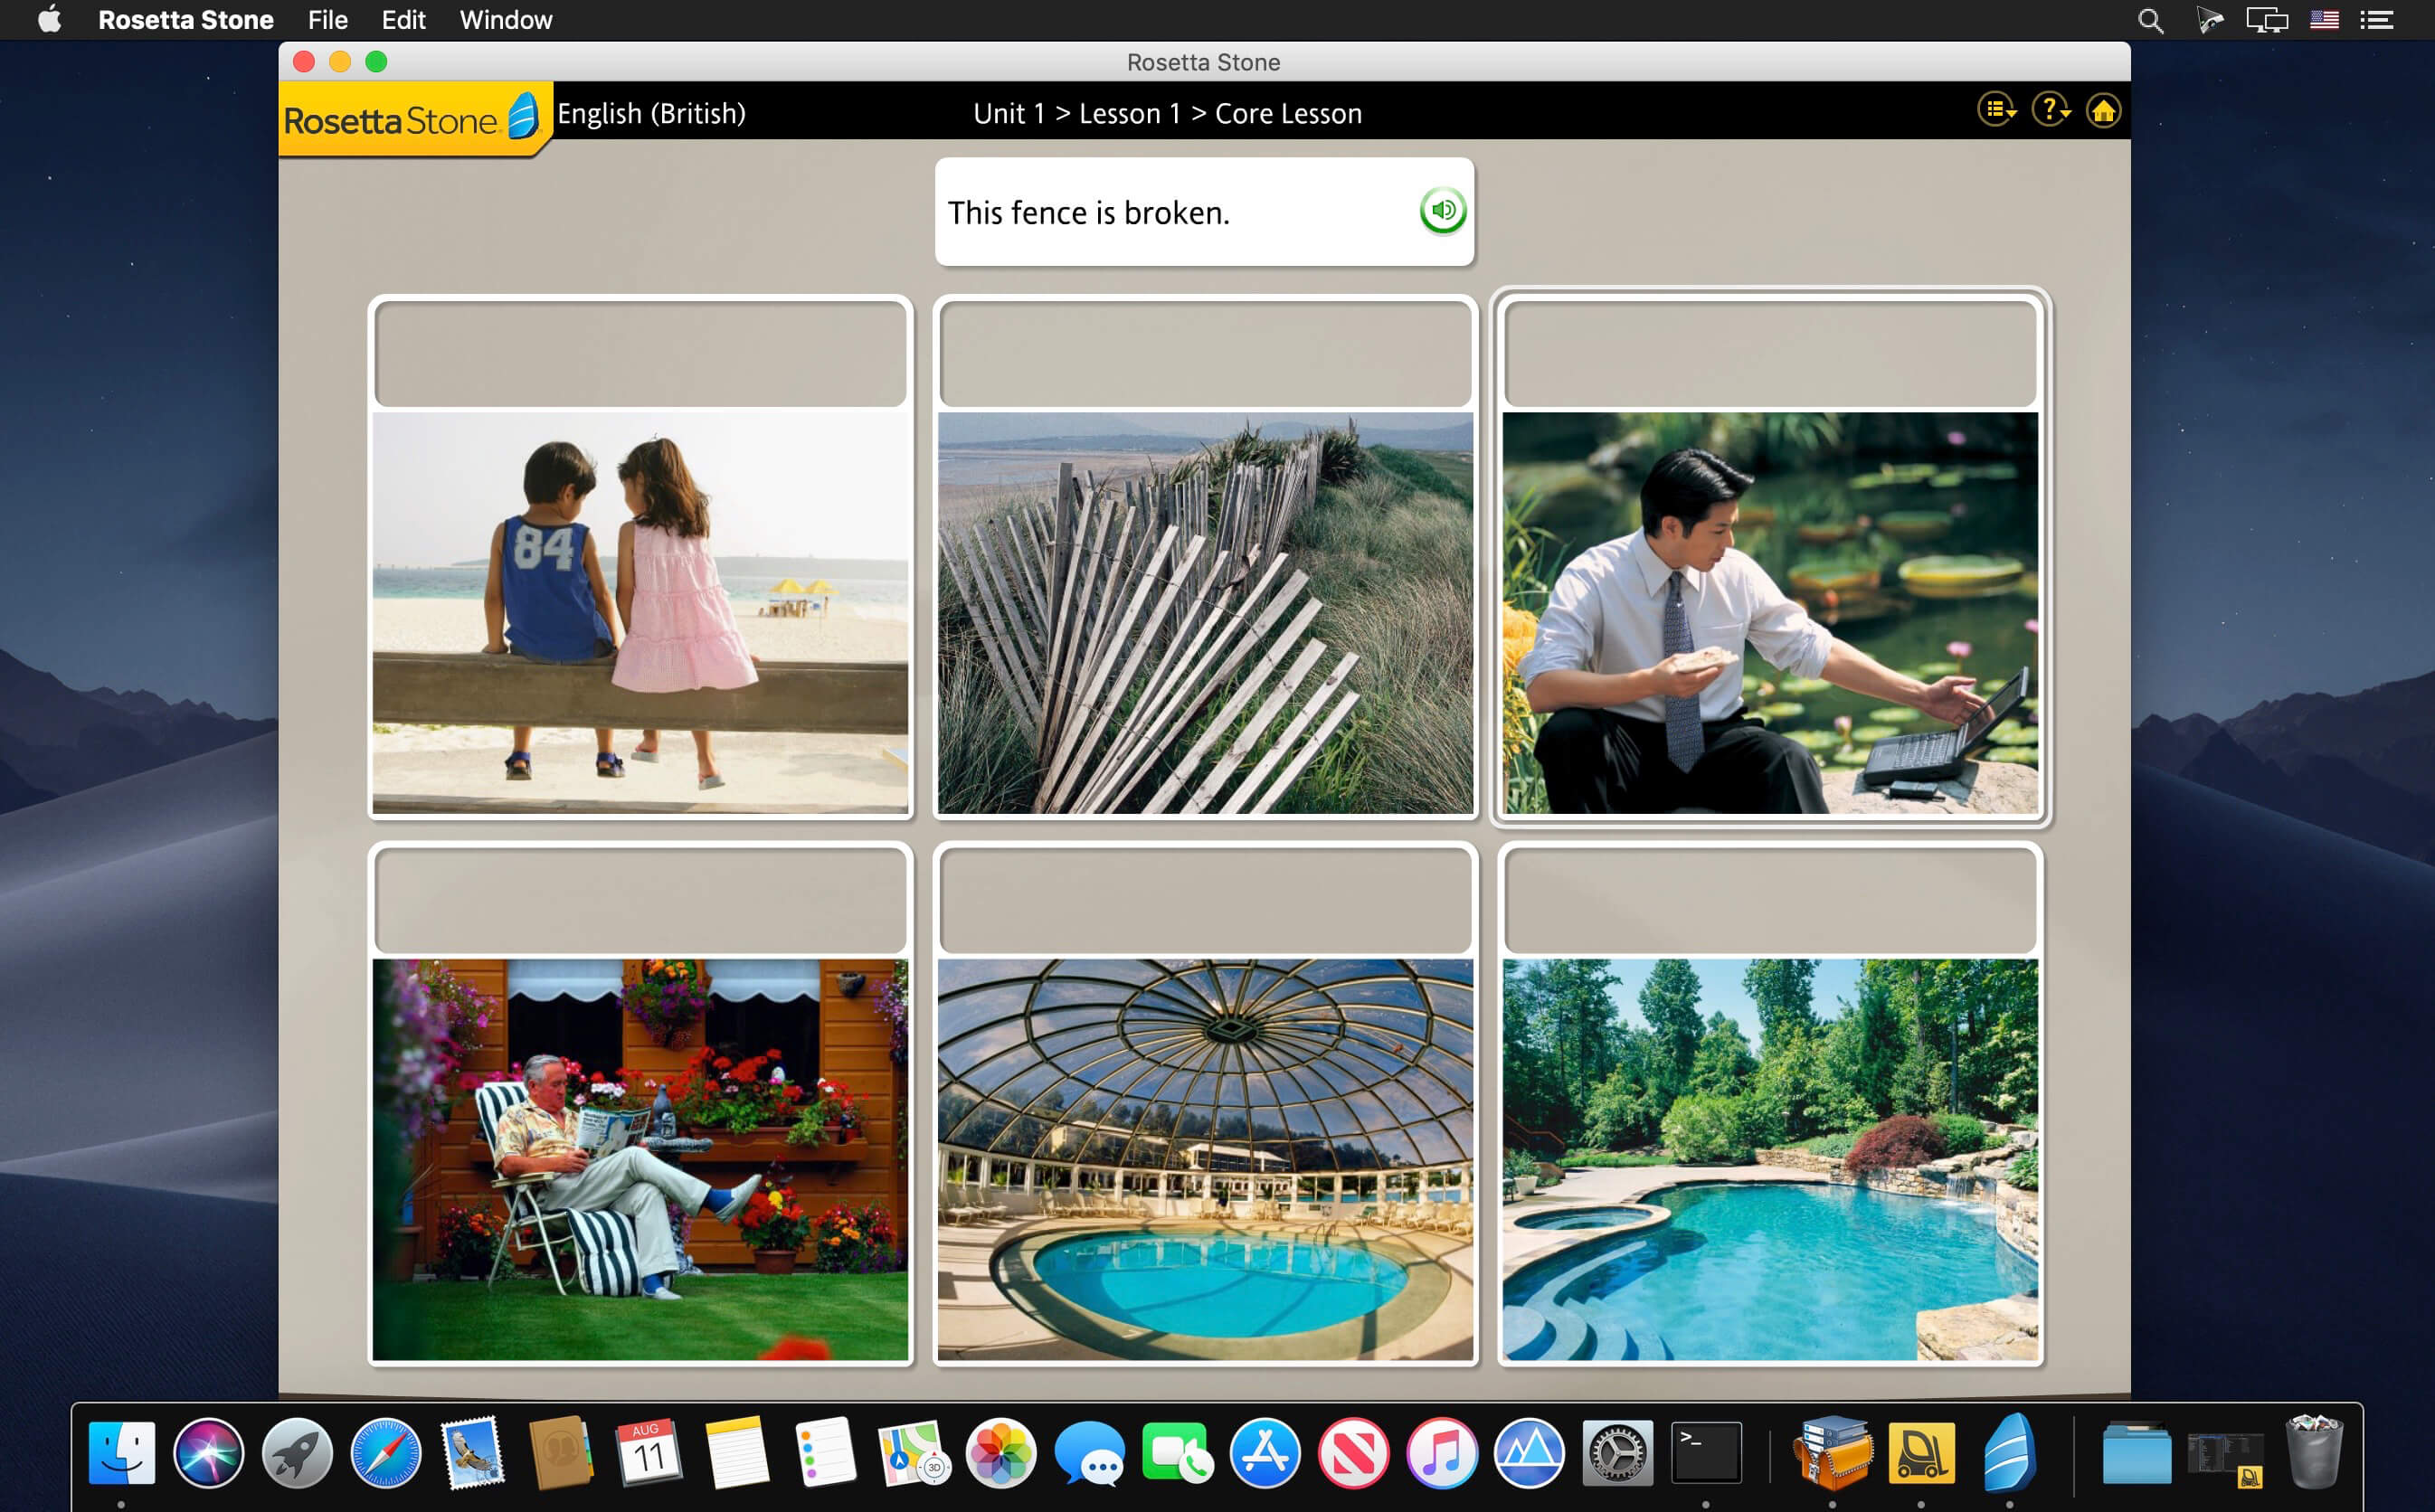 Download rosetta stone language packs mac torrent after effects cs4 free download for mac